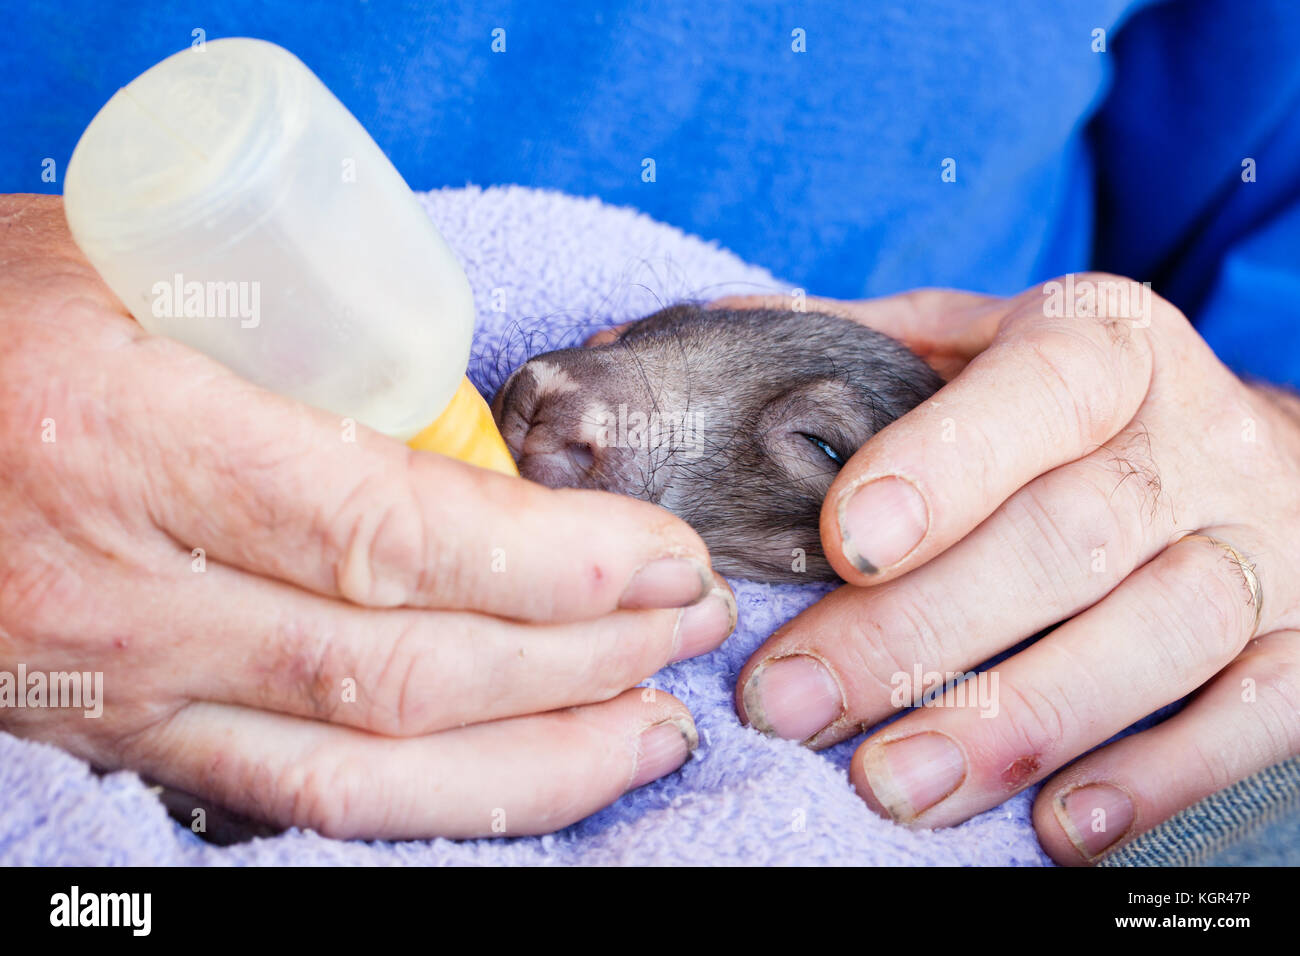 Southern Hairy-nosed Wombat (Lasiorhinus latifrons). Orphaned baby joey being bottle fed. Approx. 4 months old in care (captive). South Australia. Stock Photo